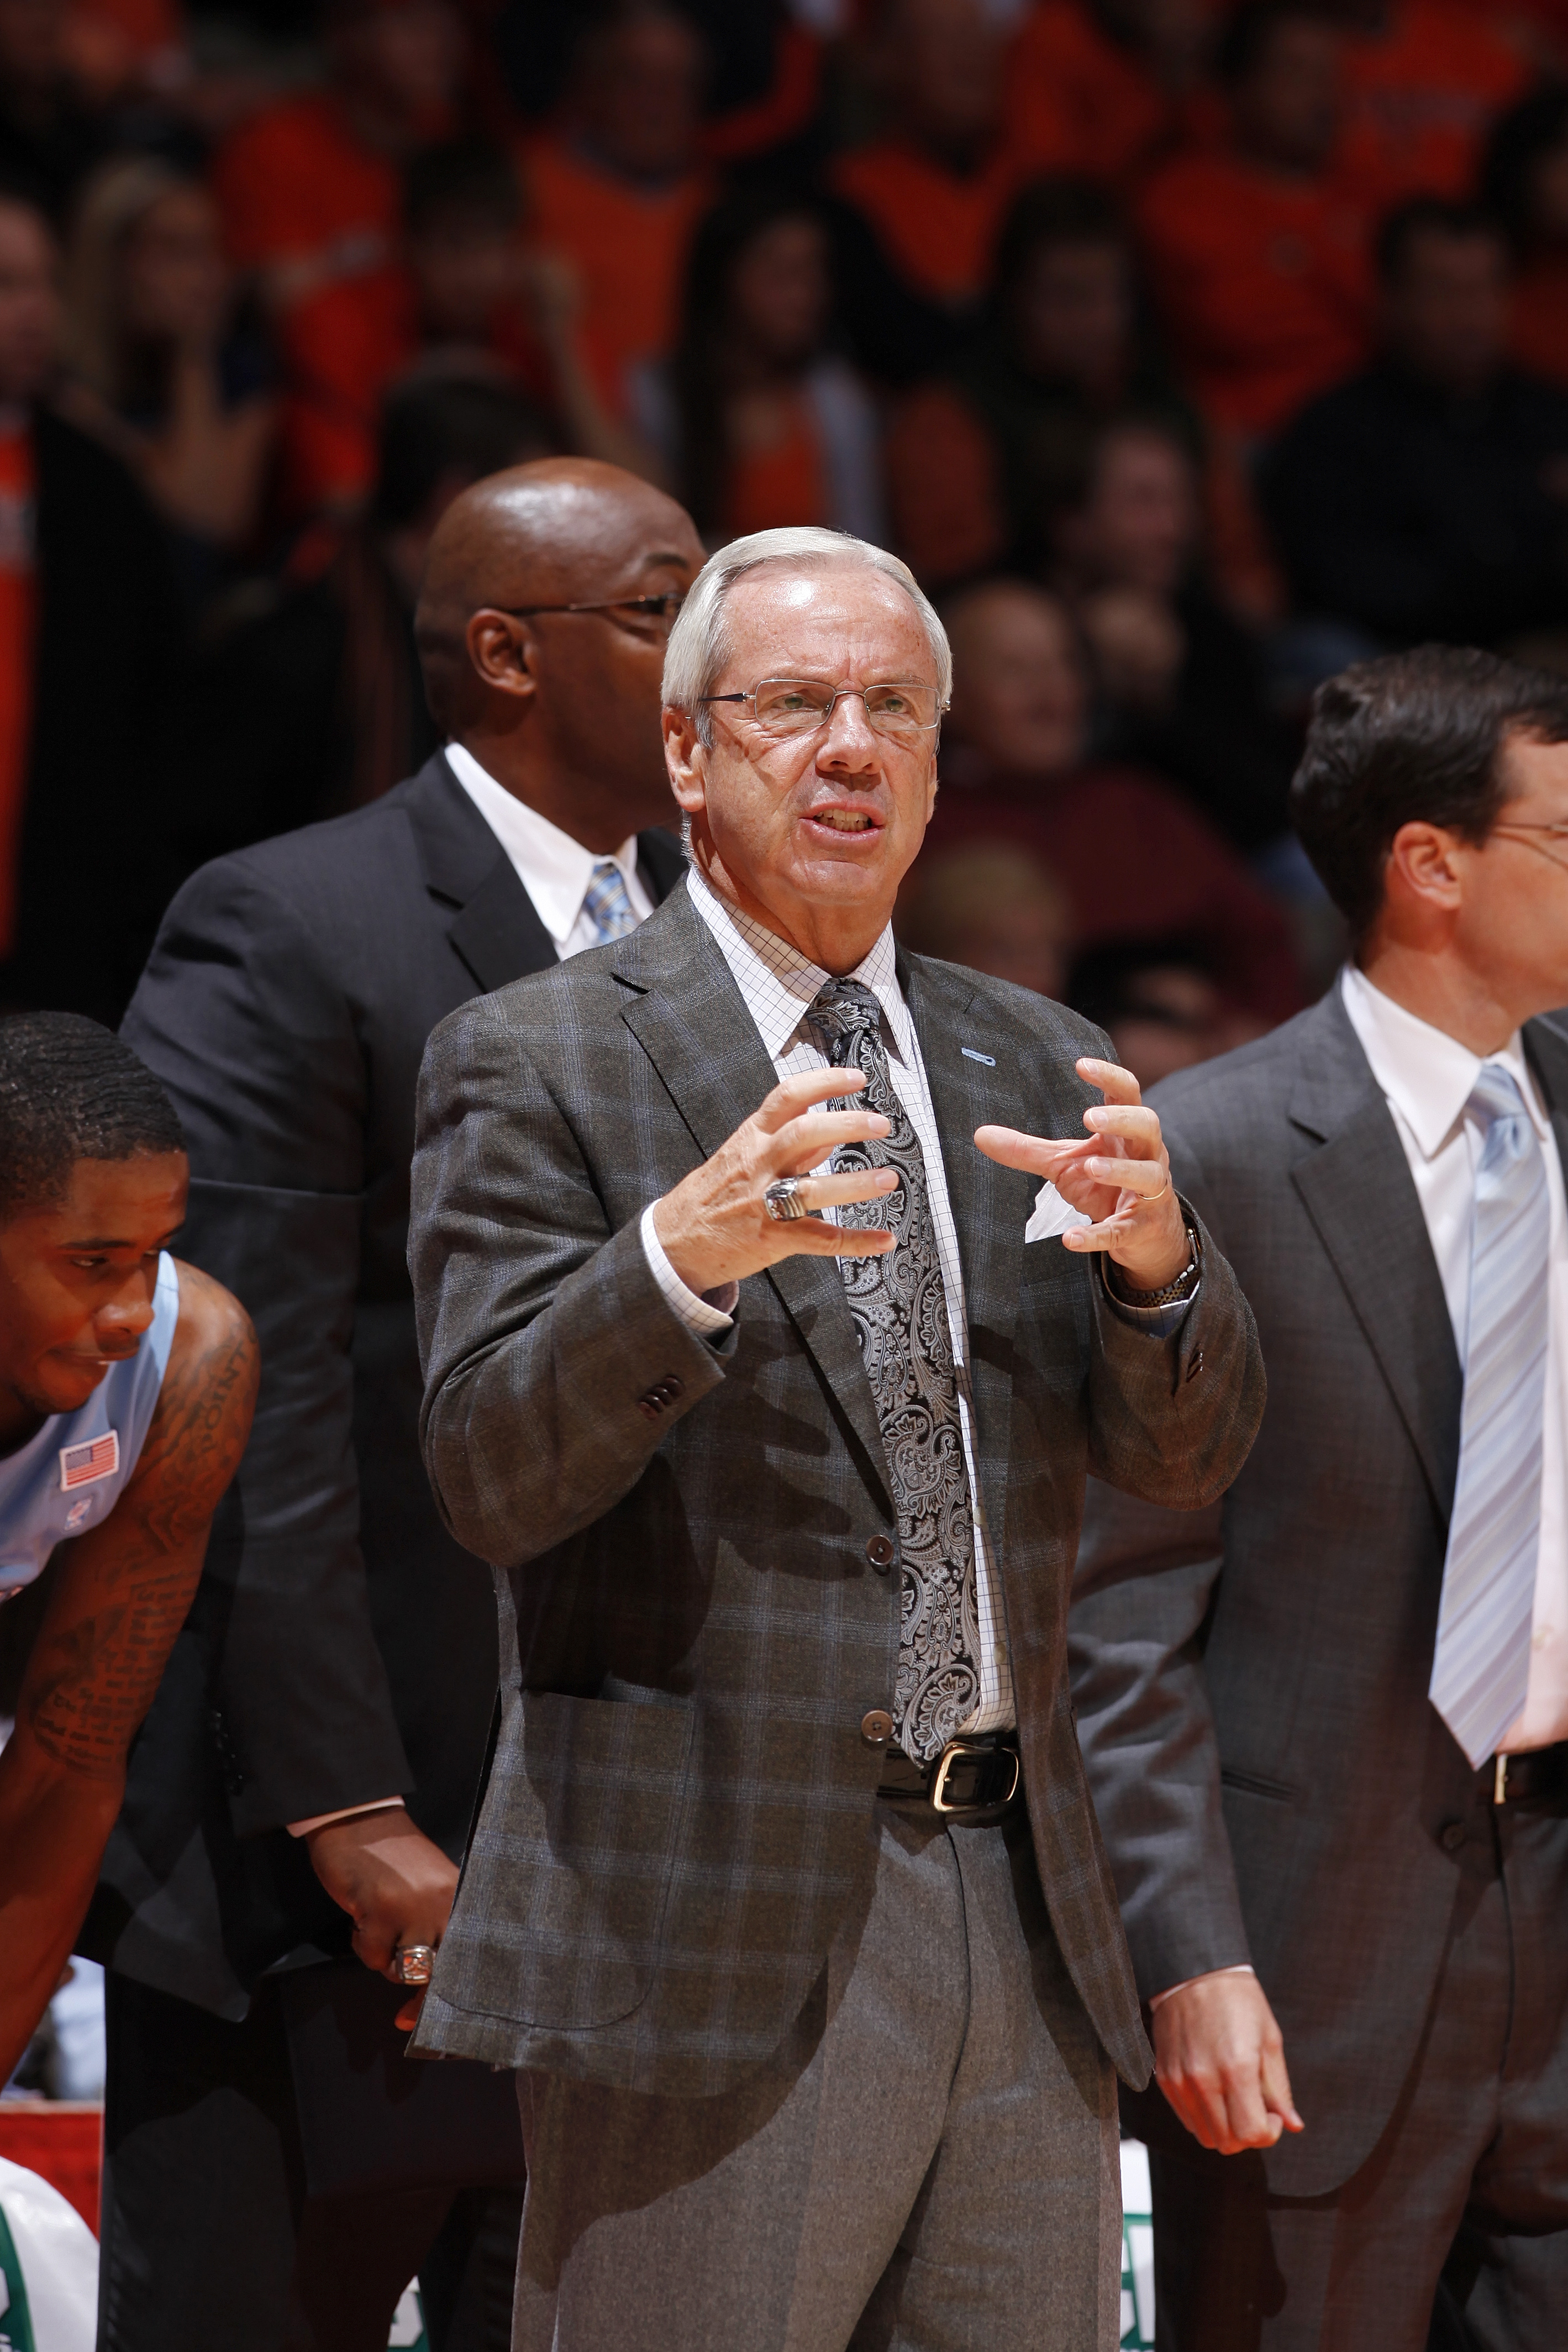 CHAMPAIGN, IL - NOVEMBER 30: North Carolina Tar Heels head coach Roy Williams looks on against the Illinois Fighting Illini during the 2010 ACC/Big Ten Challenge at Assembly Hall on November 30, 2010 in Champaign, Illinois. Illinois defeated the Tar Heels